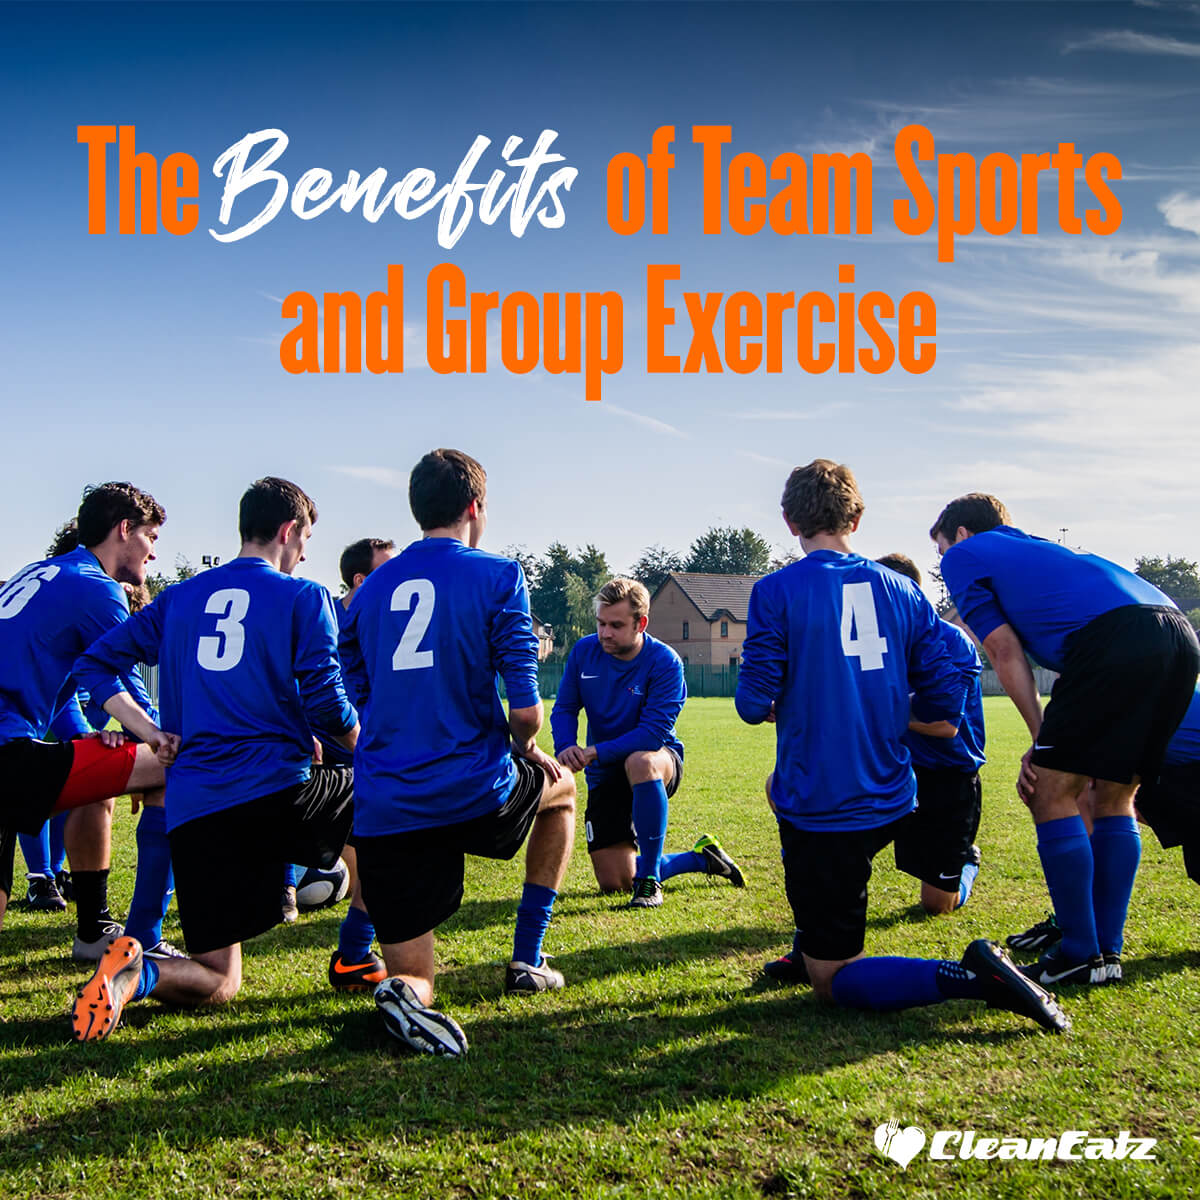 Team Sports and Group Training